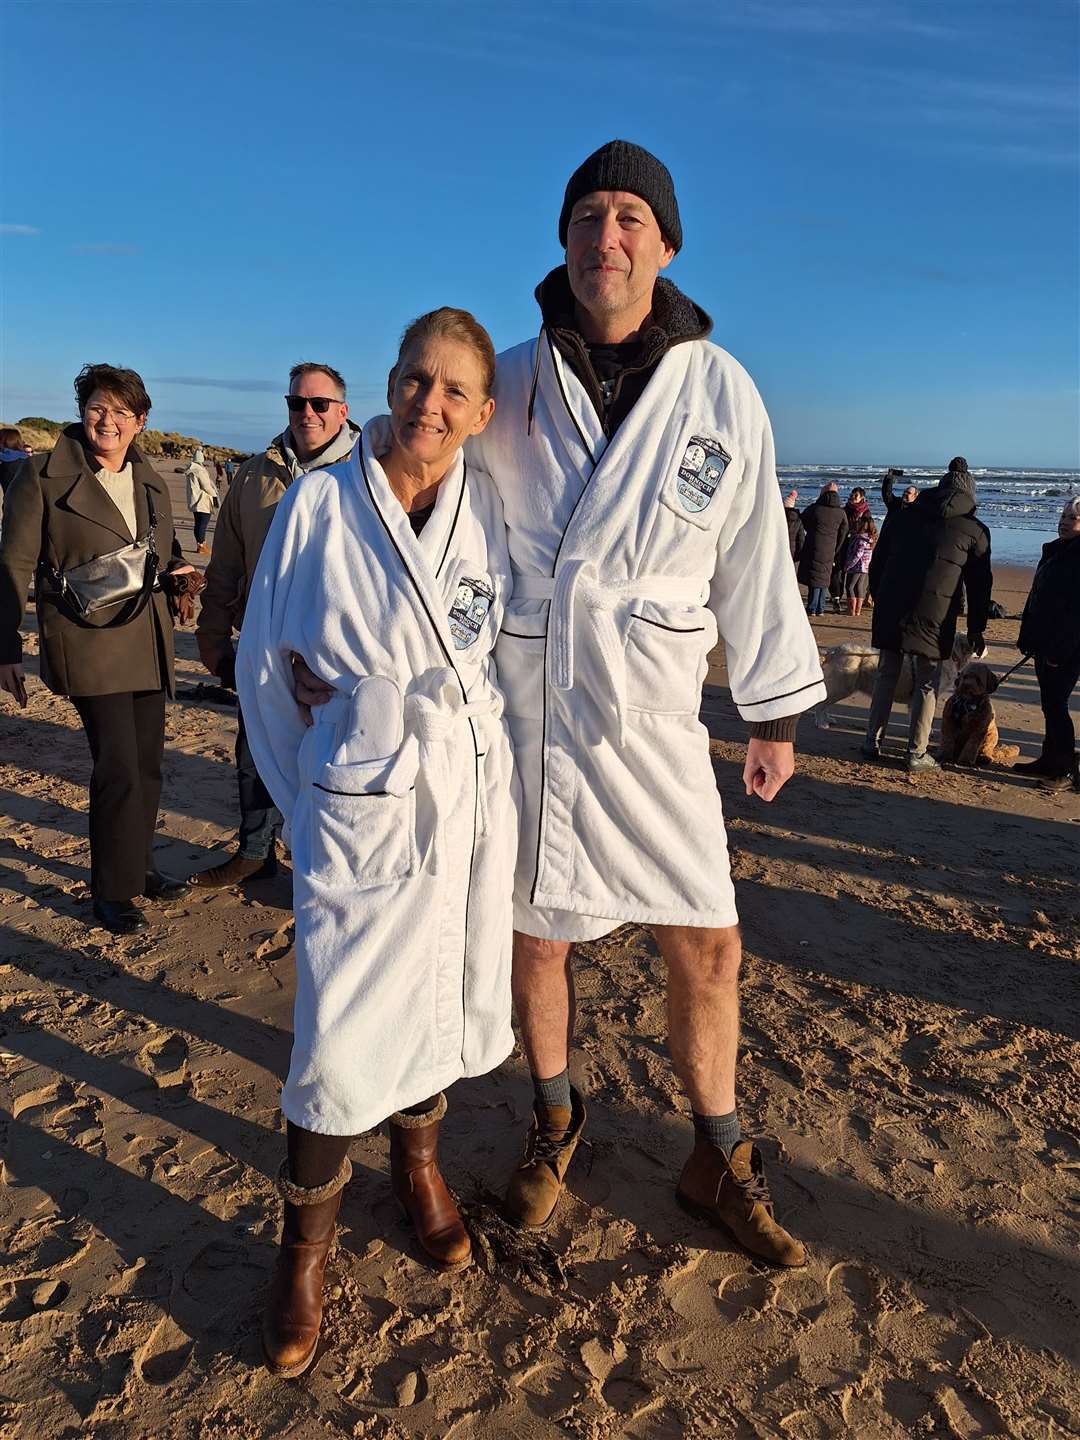 Dutch couple Egbert and Marianne Vennik from Rotterdam holiday in Scotland every New Year, but usually stay in Sky. This year they decided to visit Dornoch and decided to take part in the Loony Dook.